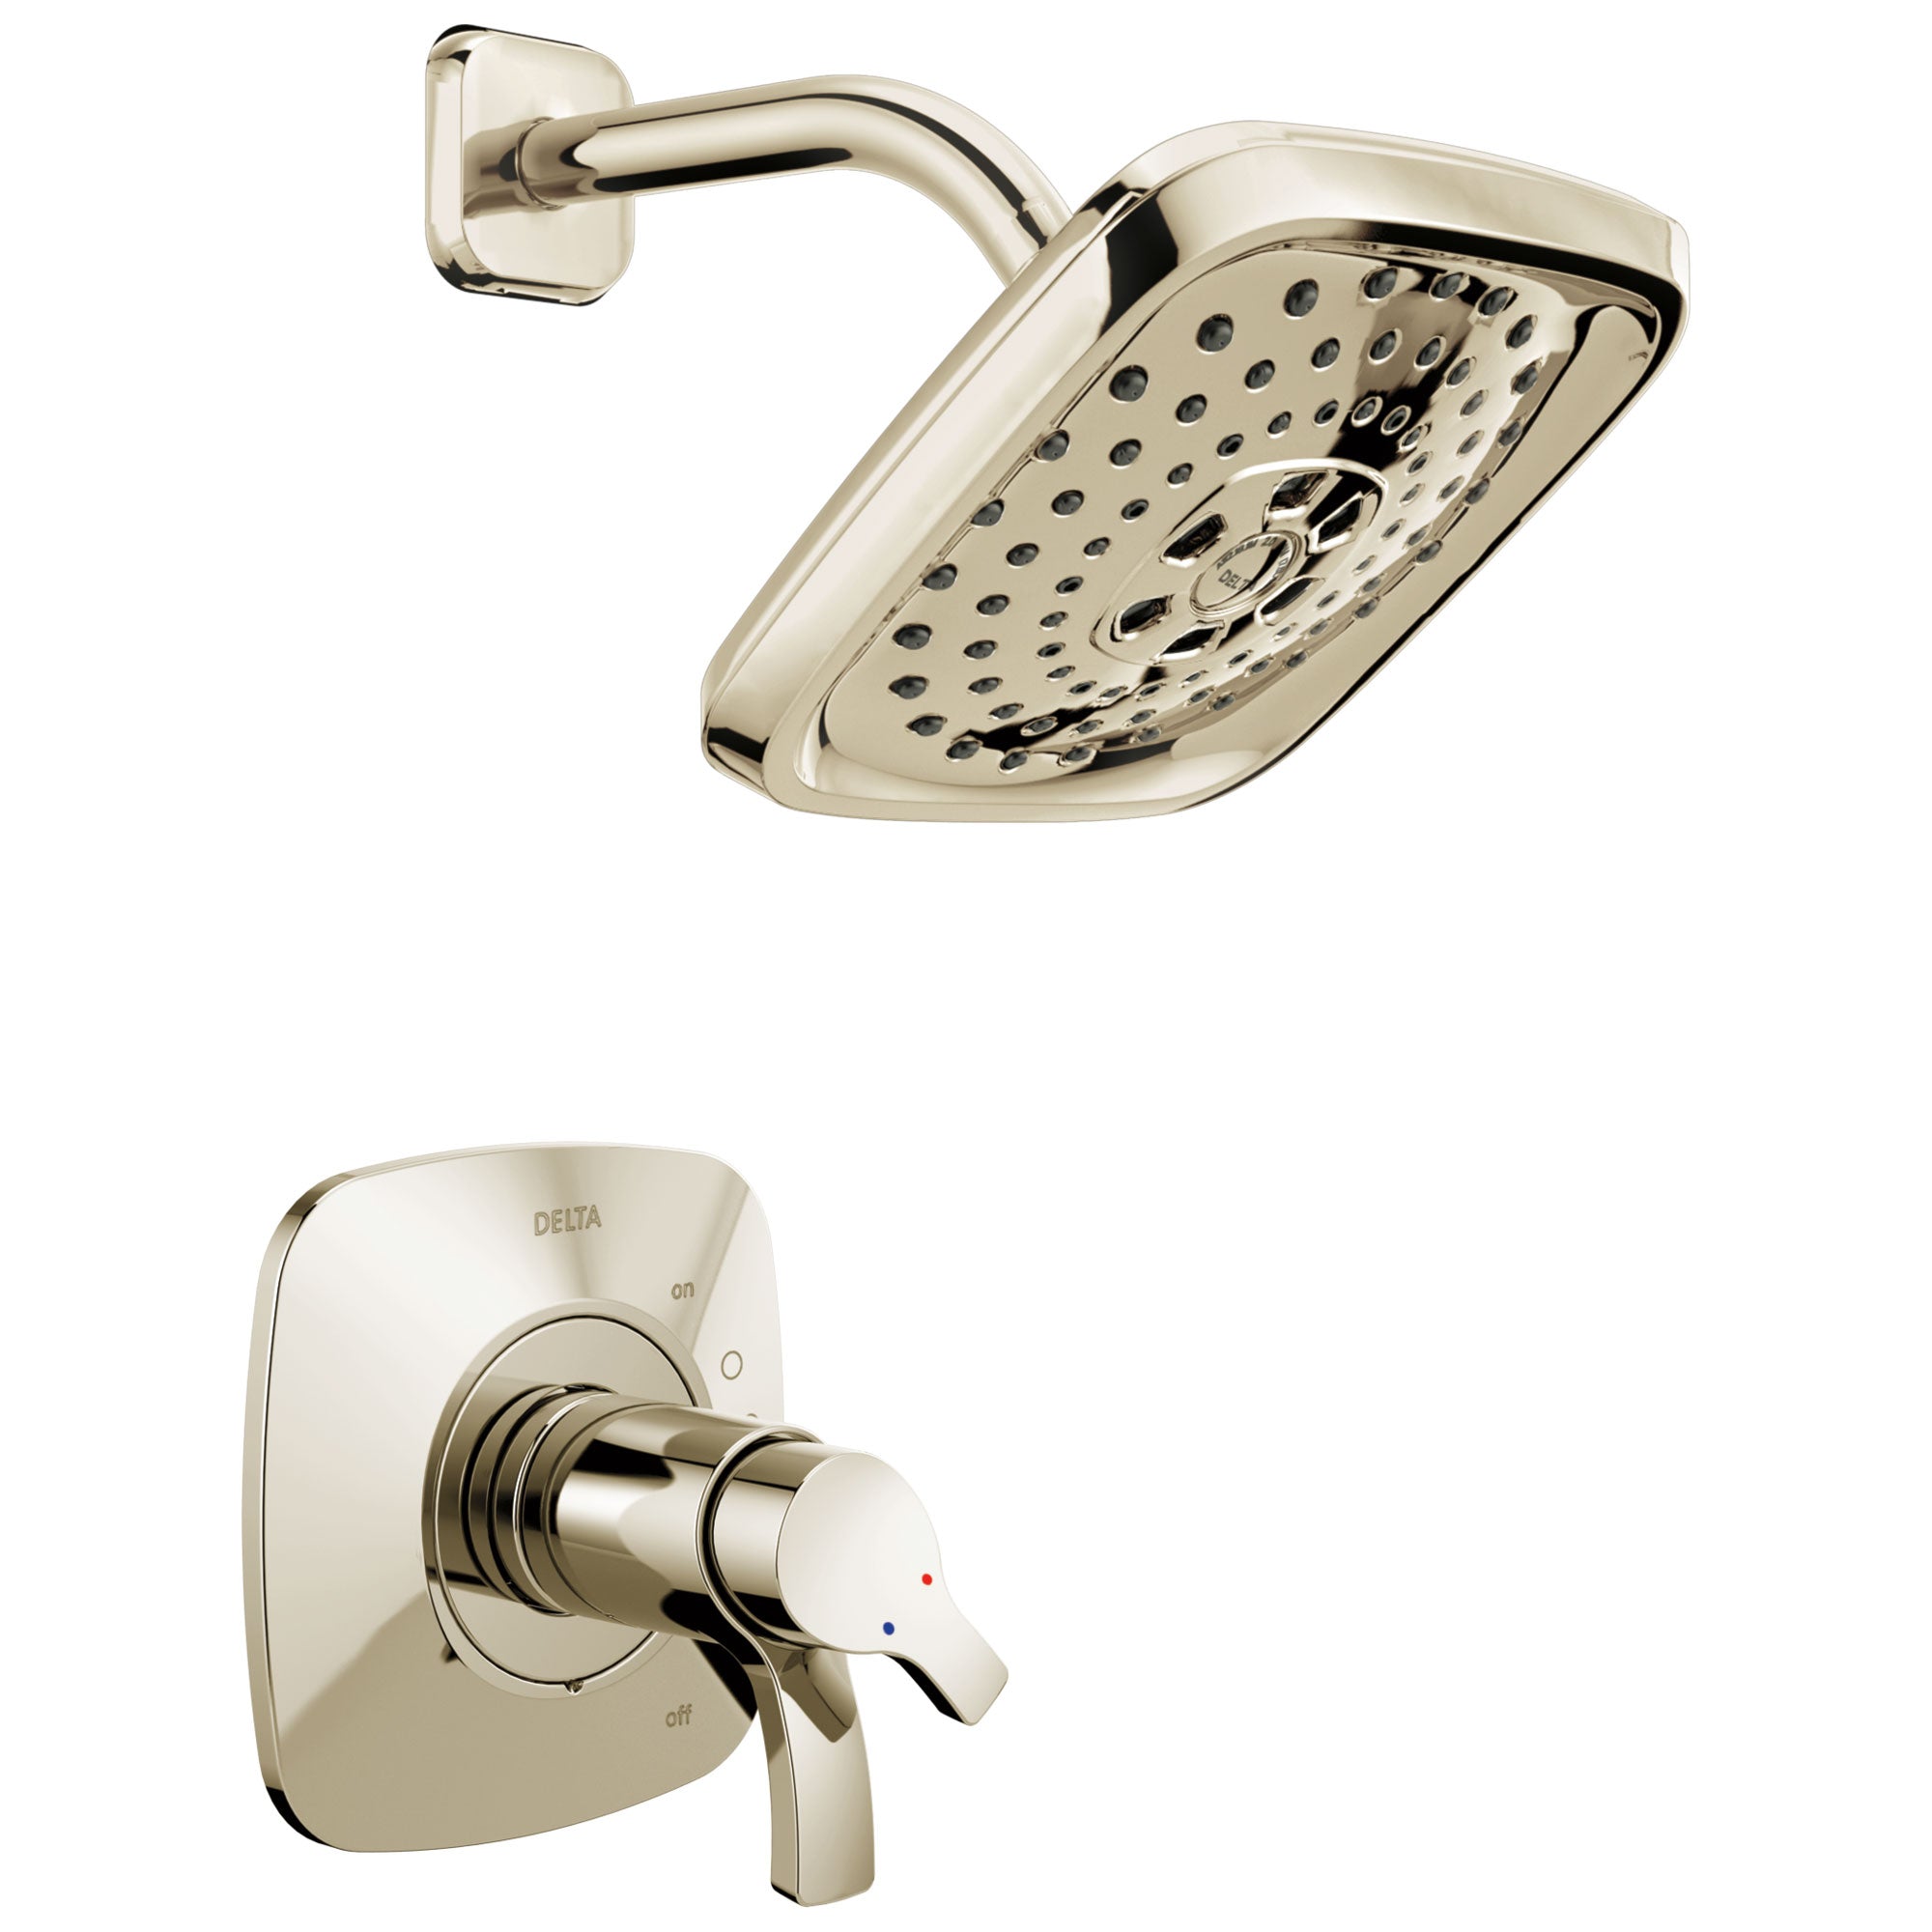 Delta Tesla Collection Polished Nickel TempAssure 17T Series Modern Dual Temp and Pressure Control Shower Faucet Trim (Valve Sold Separately) 732779